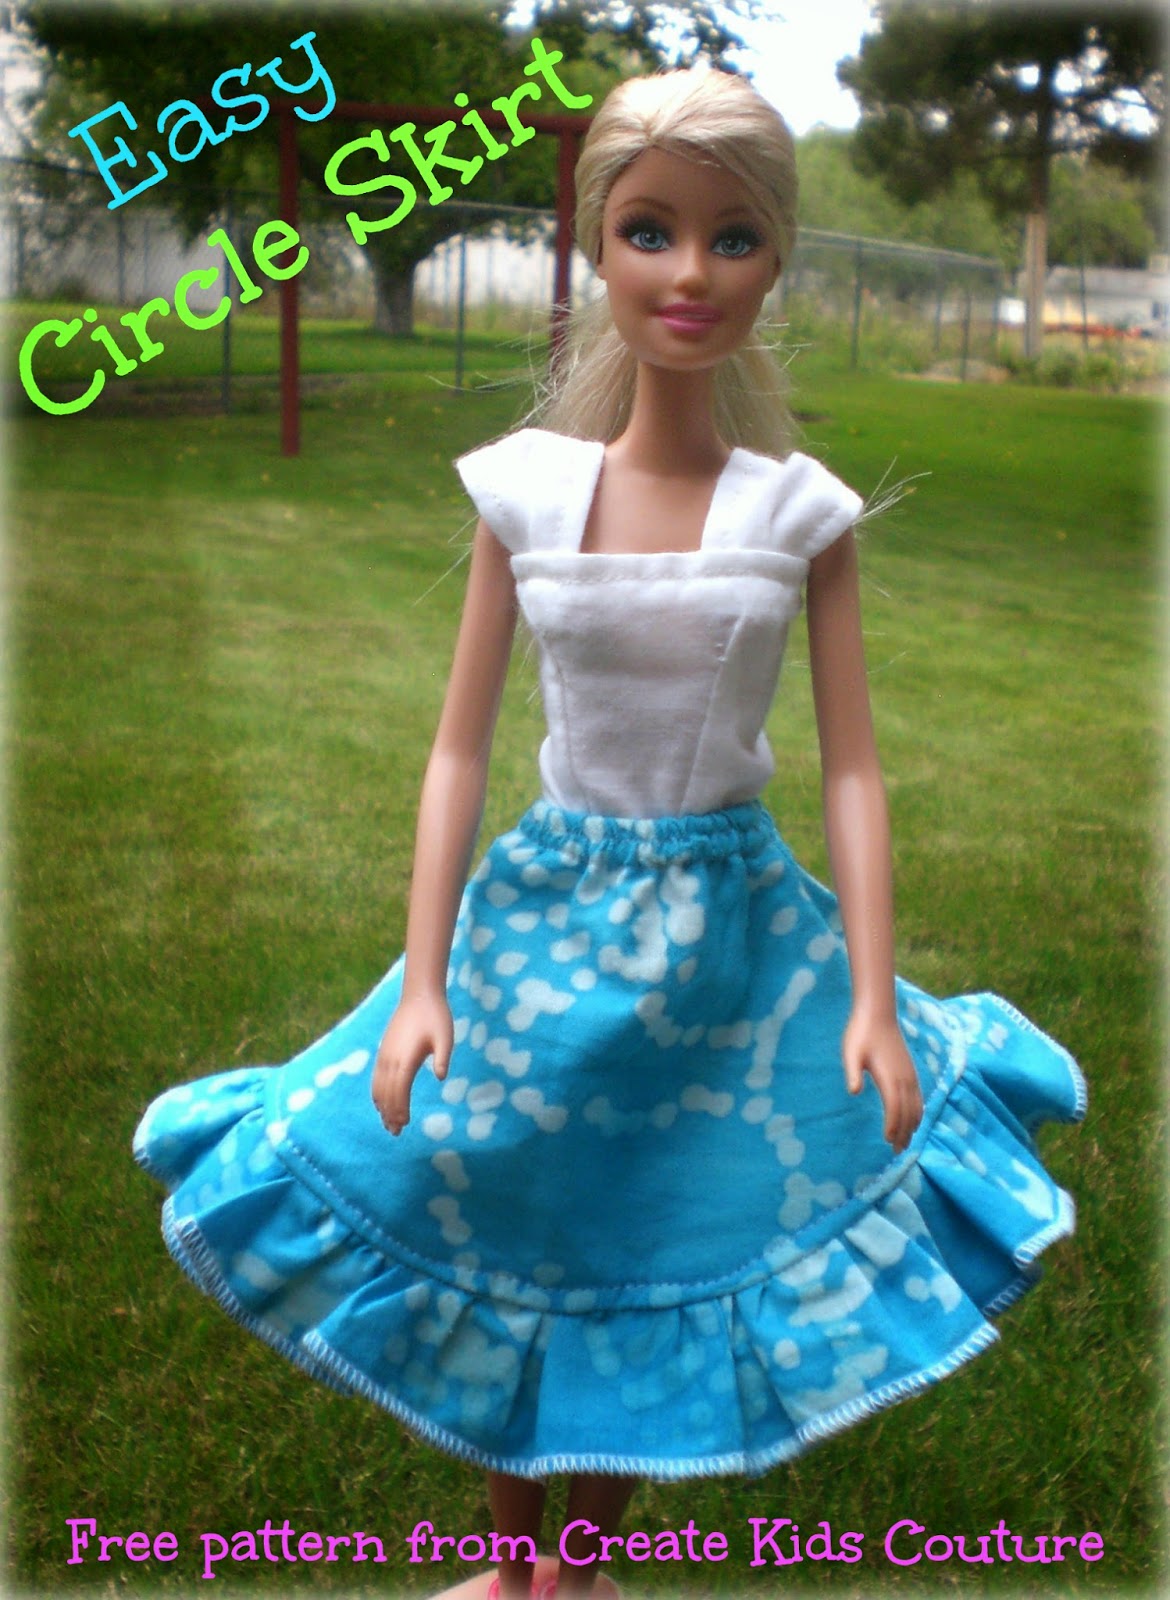 Create Kids Couture: Barbie's Cece-Inspired Circle Skirt